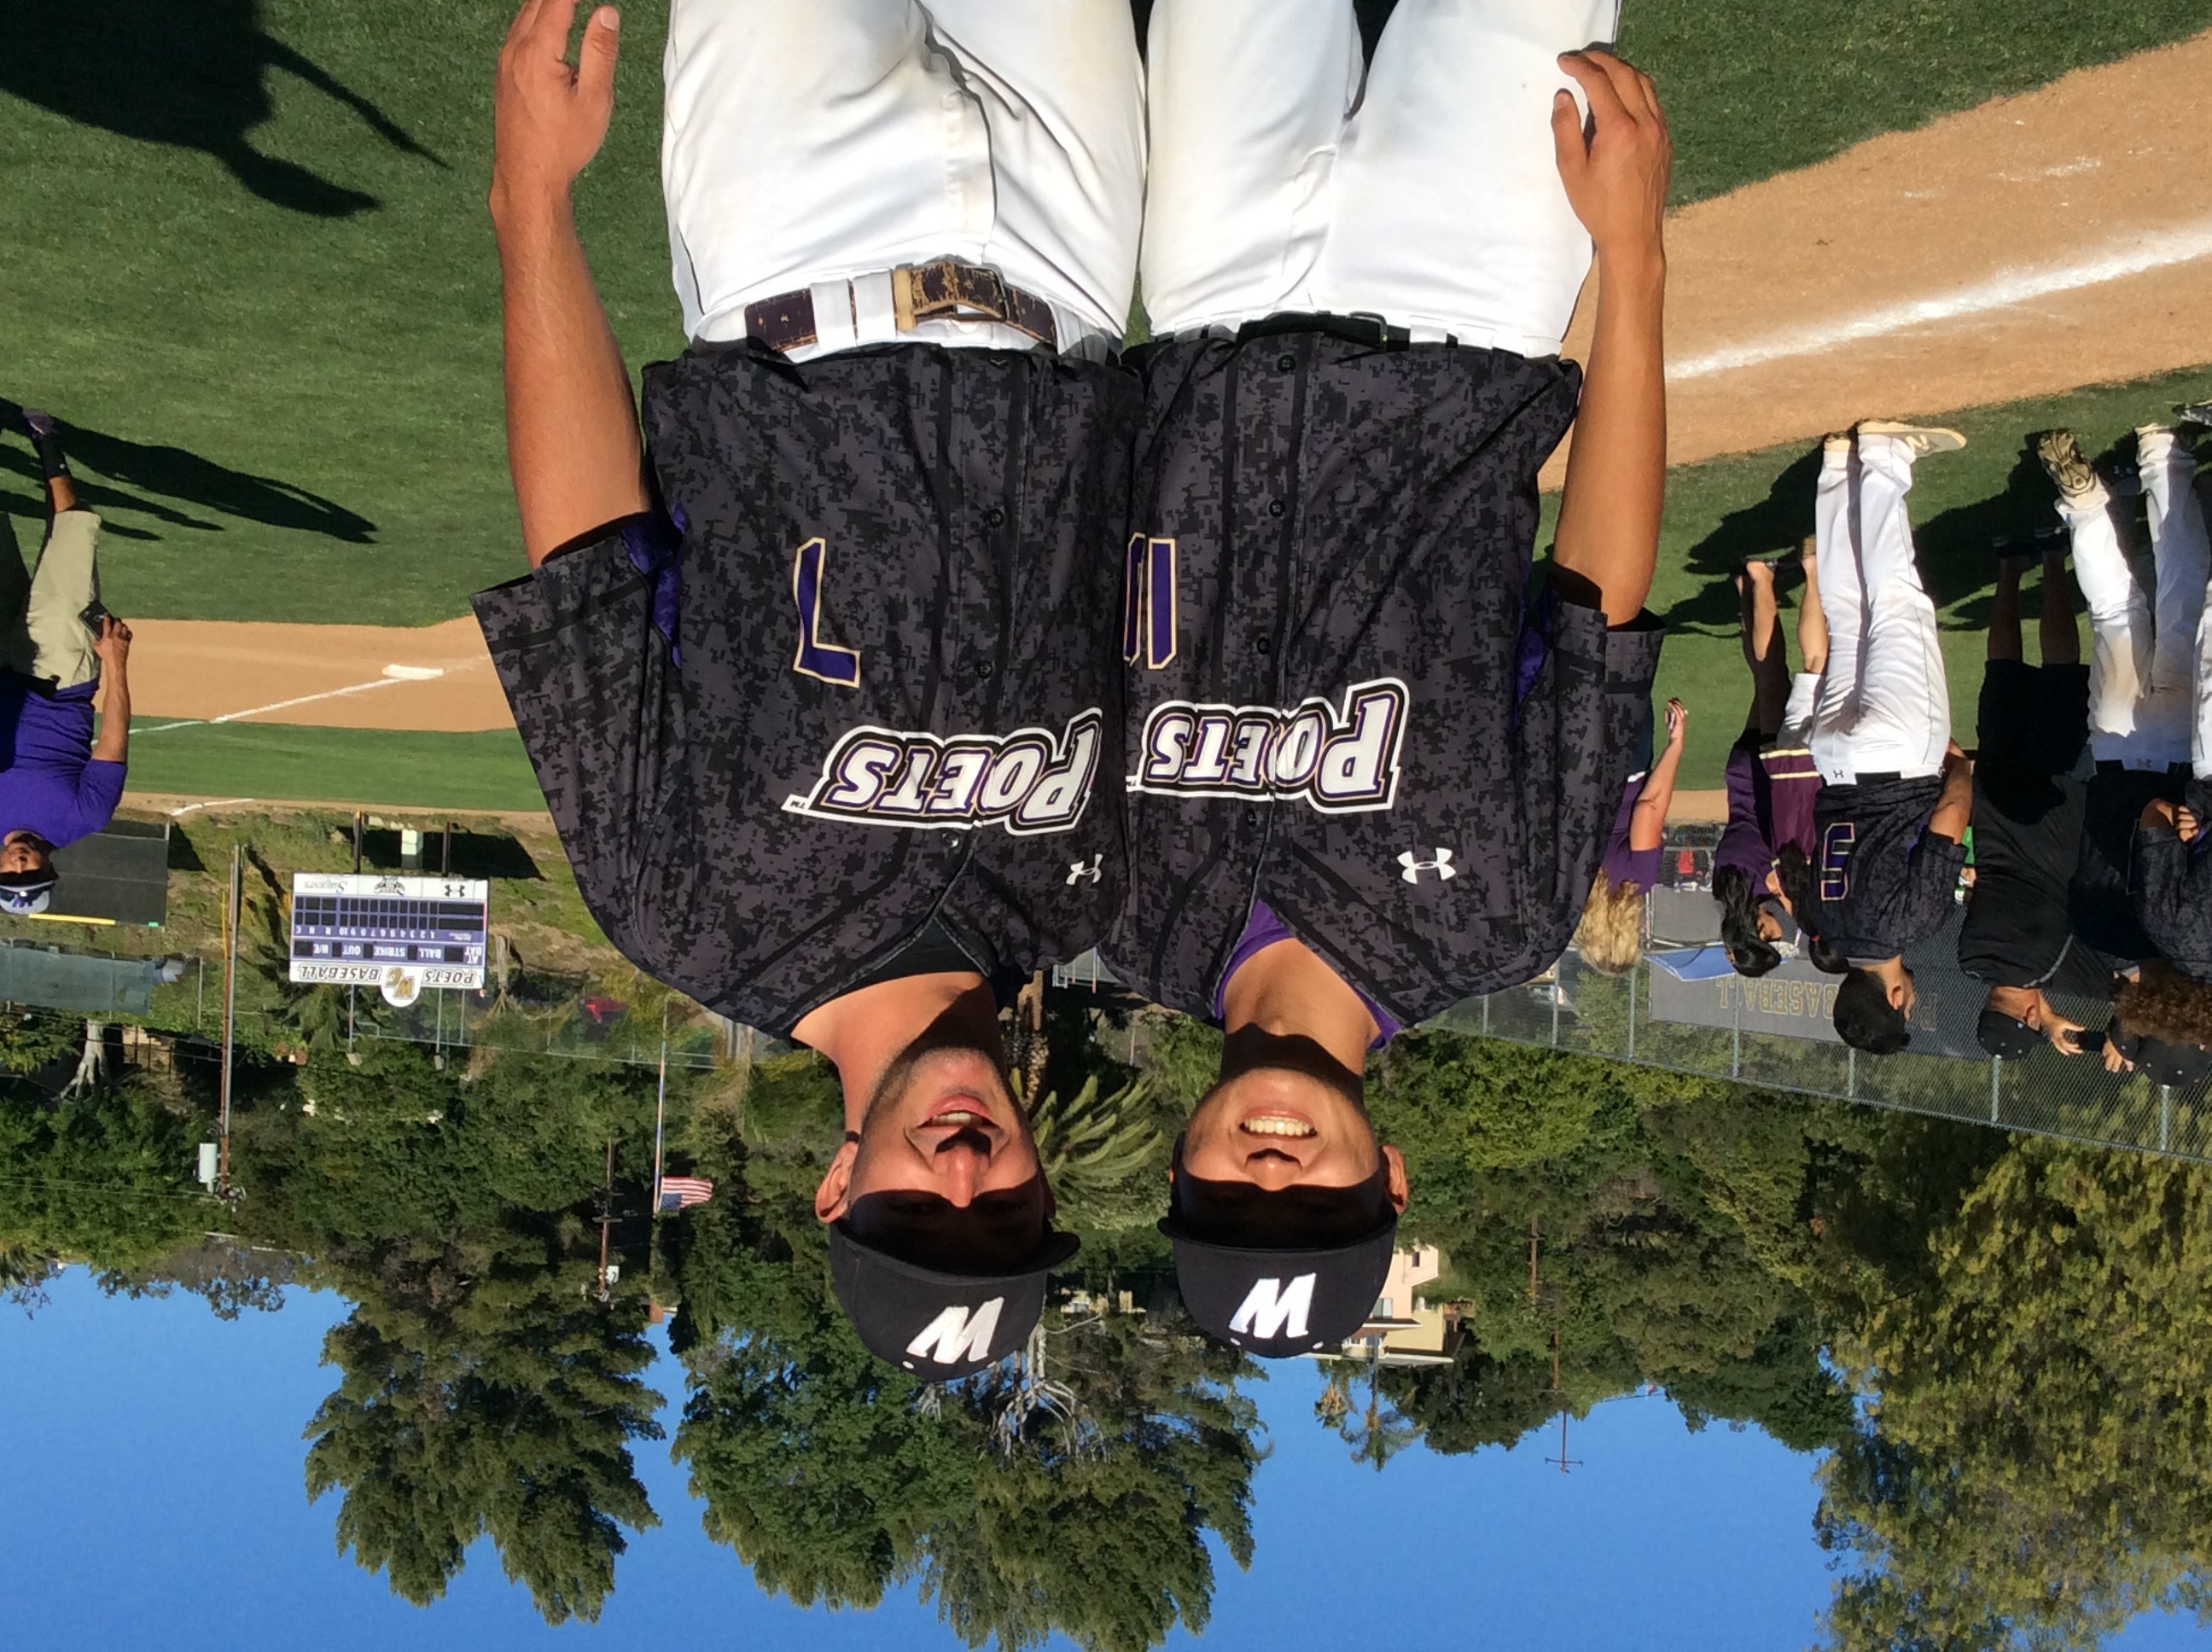 Ketchum Marsh ’16 is pictured during his time playing baseball for Whittier College. Head baseball coach Mike Rizzo encouraged Marsh to play internationally.